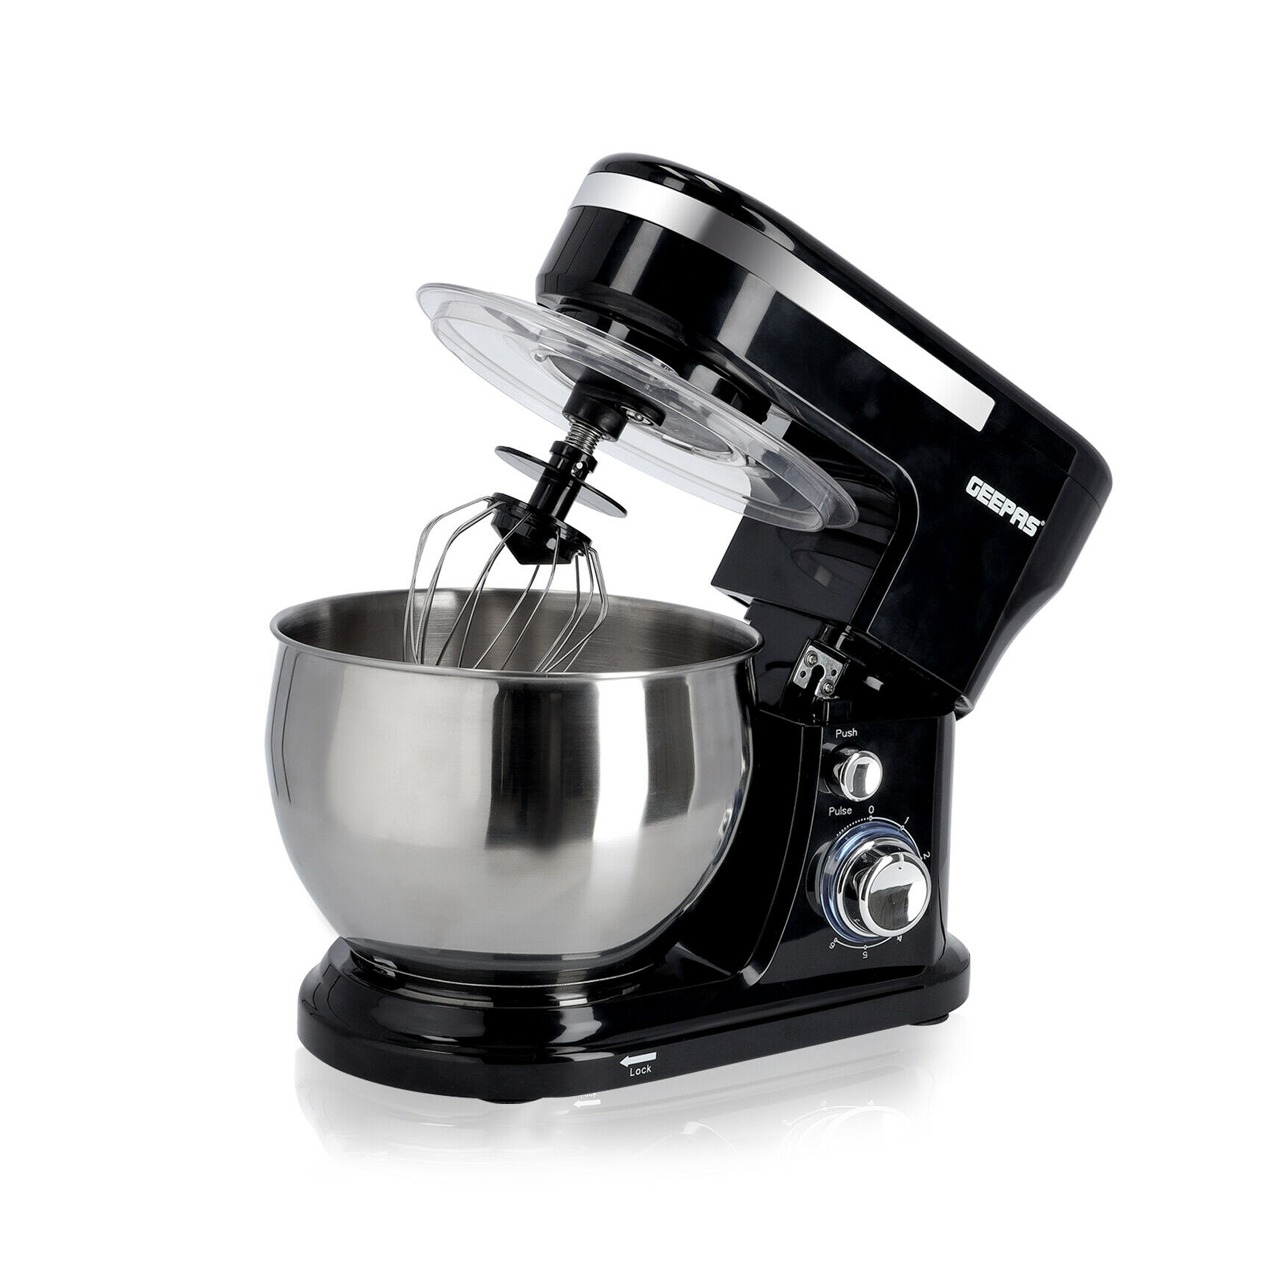 Wholesale Hot selling product heinrich cake mixers industrial cake mixer  15l with cheap price From m.alibaba.com